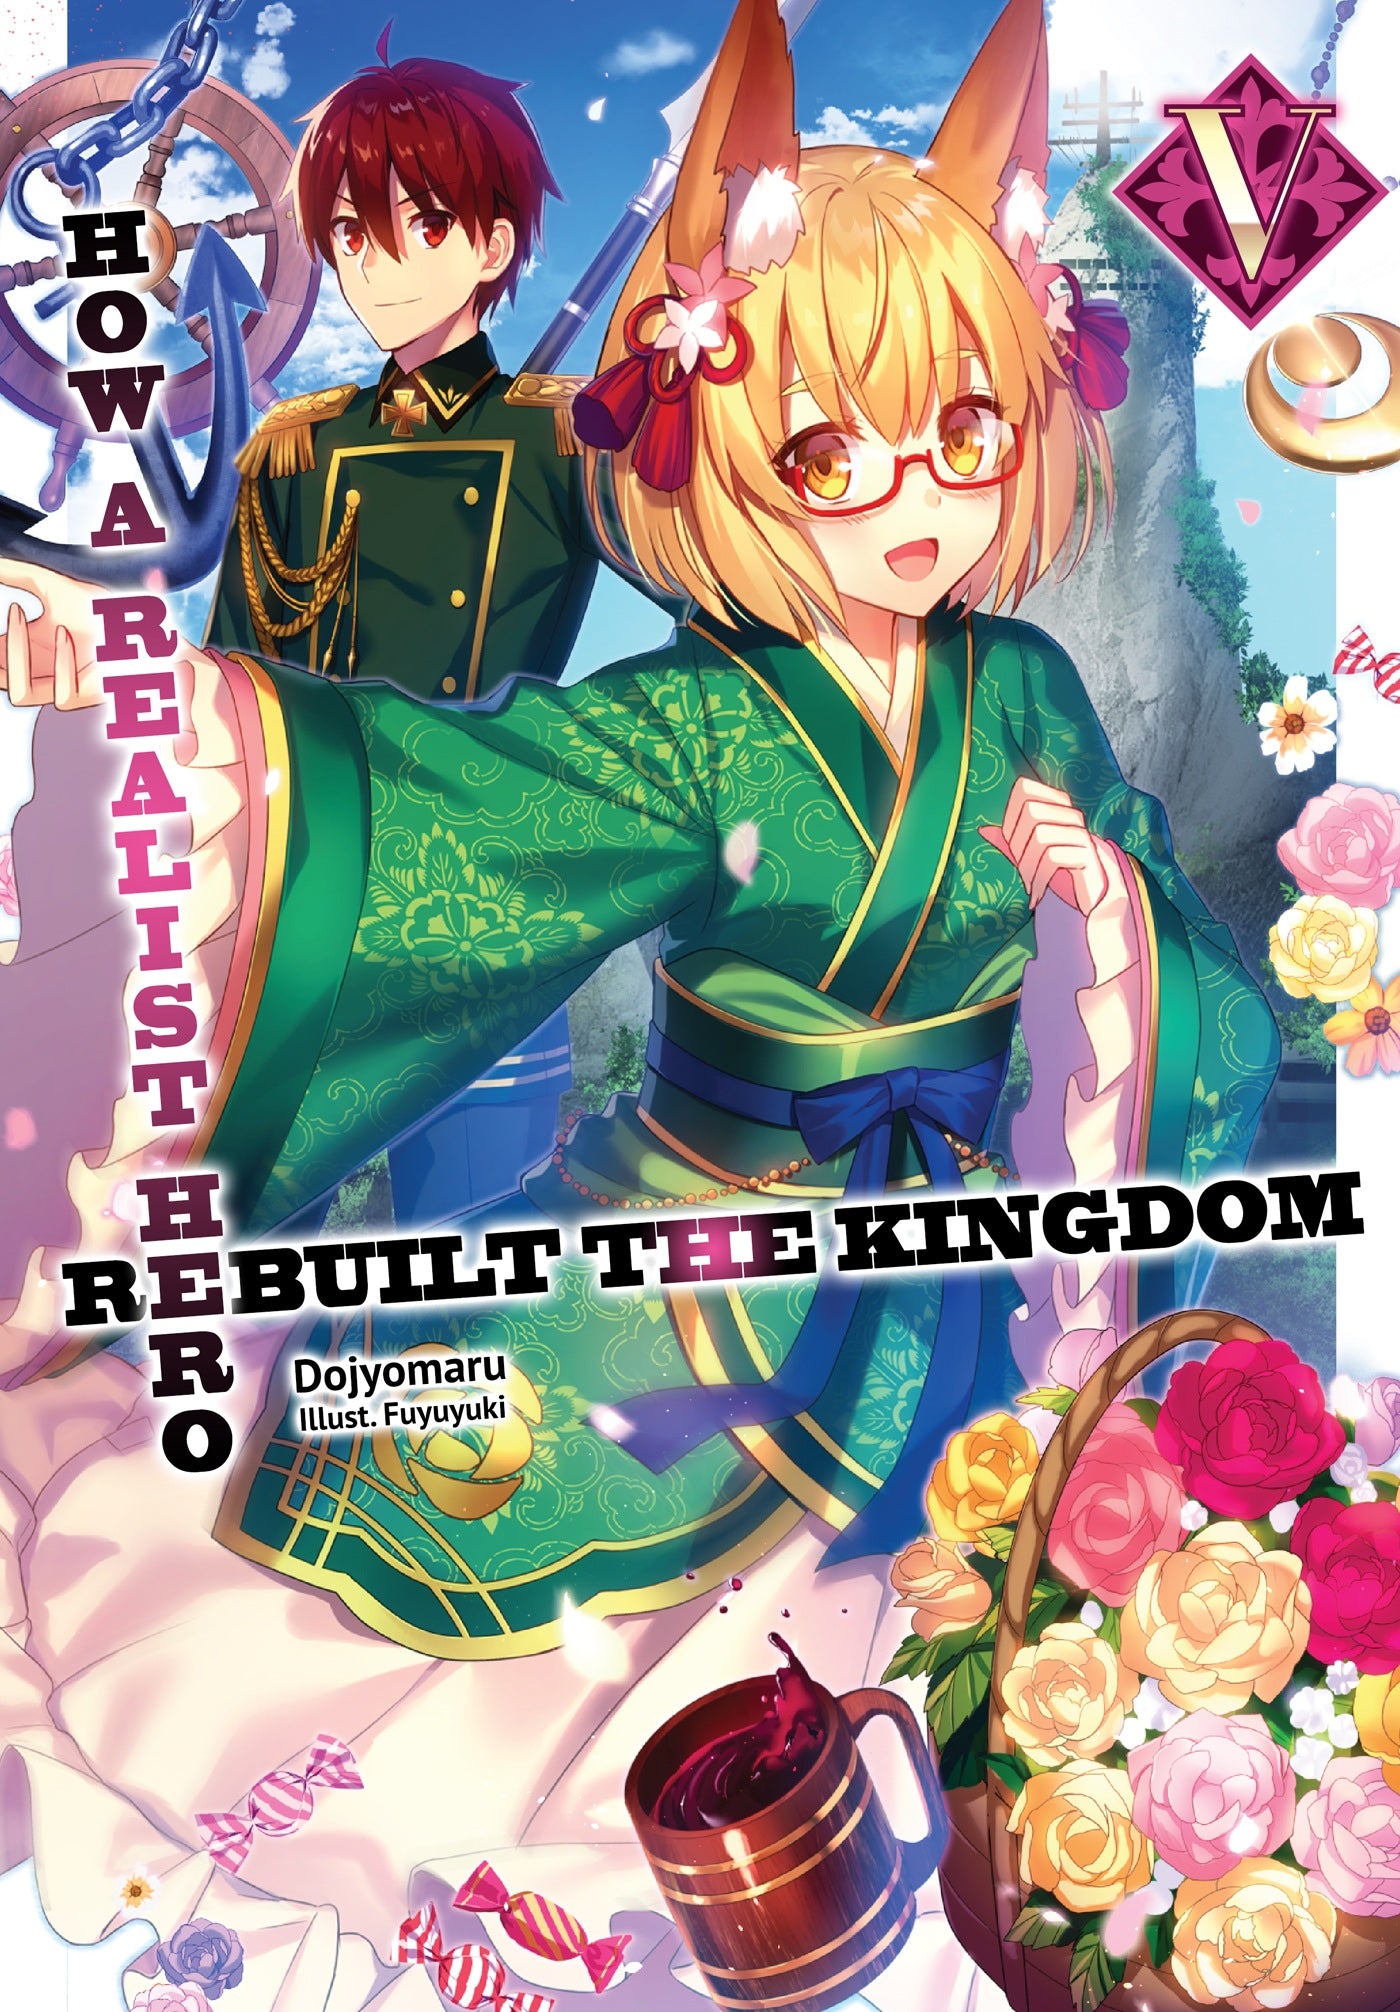 How a Realist Hero Rebuilt the Kingdom (Light Novel) Vol. 05 (Out of Stock Indefinitely)